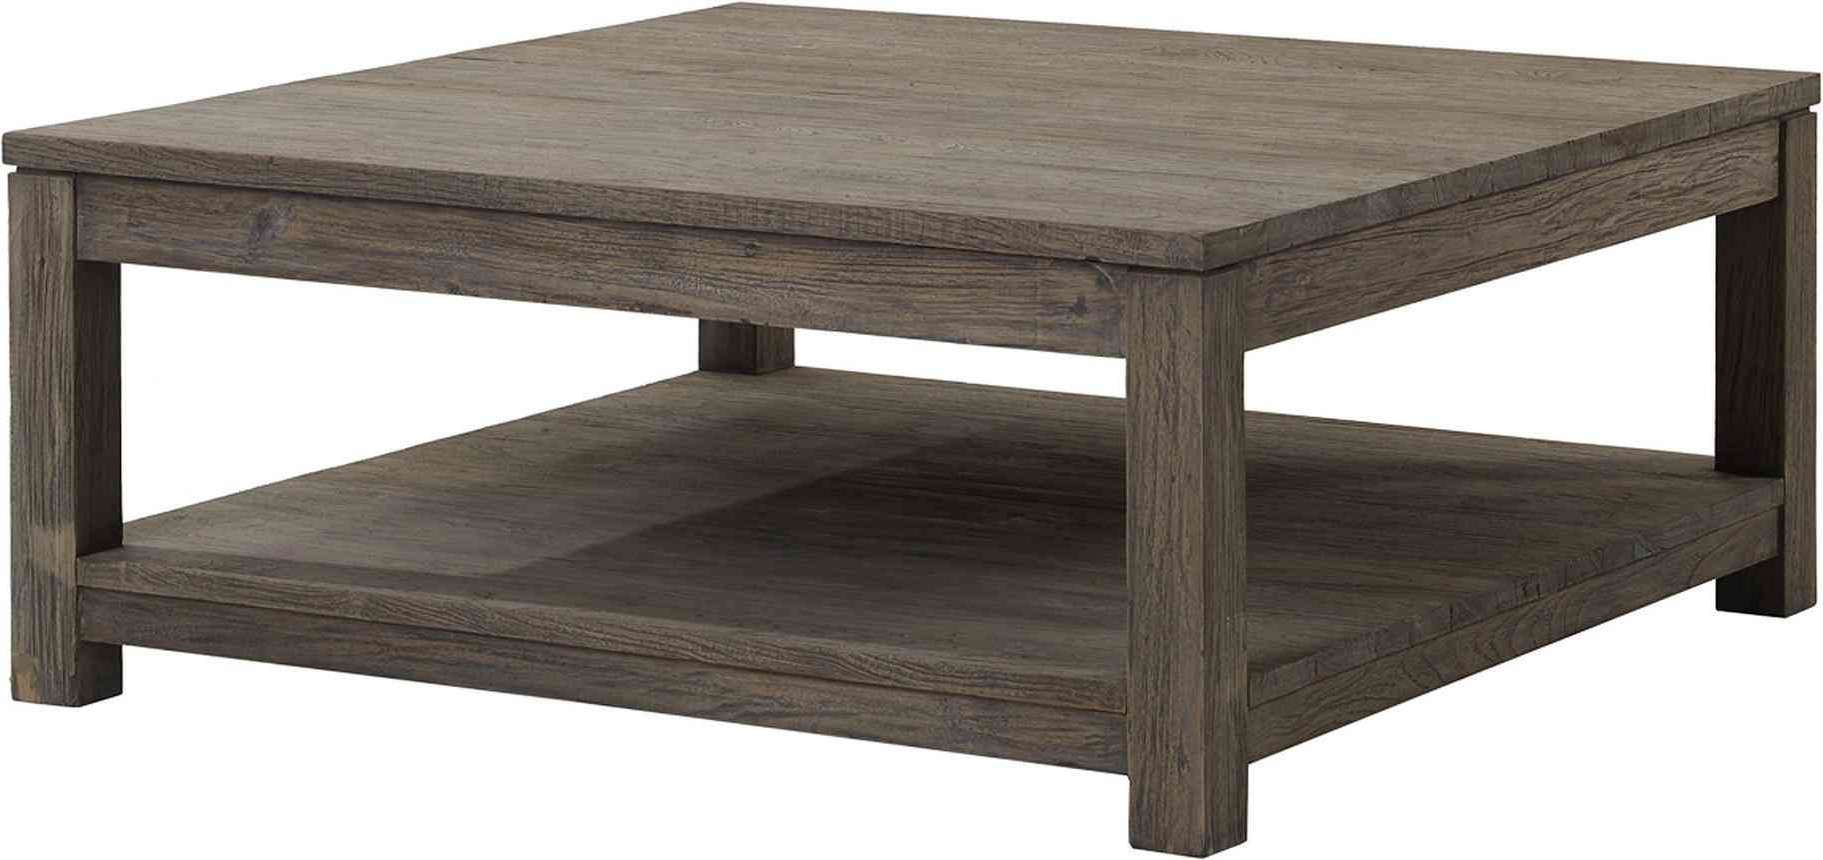 Coffee Tables : Square Coffee Tables Living Room Table Cheap For Inside Well Known Large Square Coffee Tables (View 2 of 20)